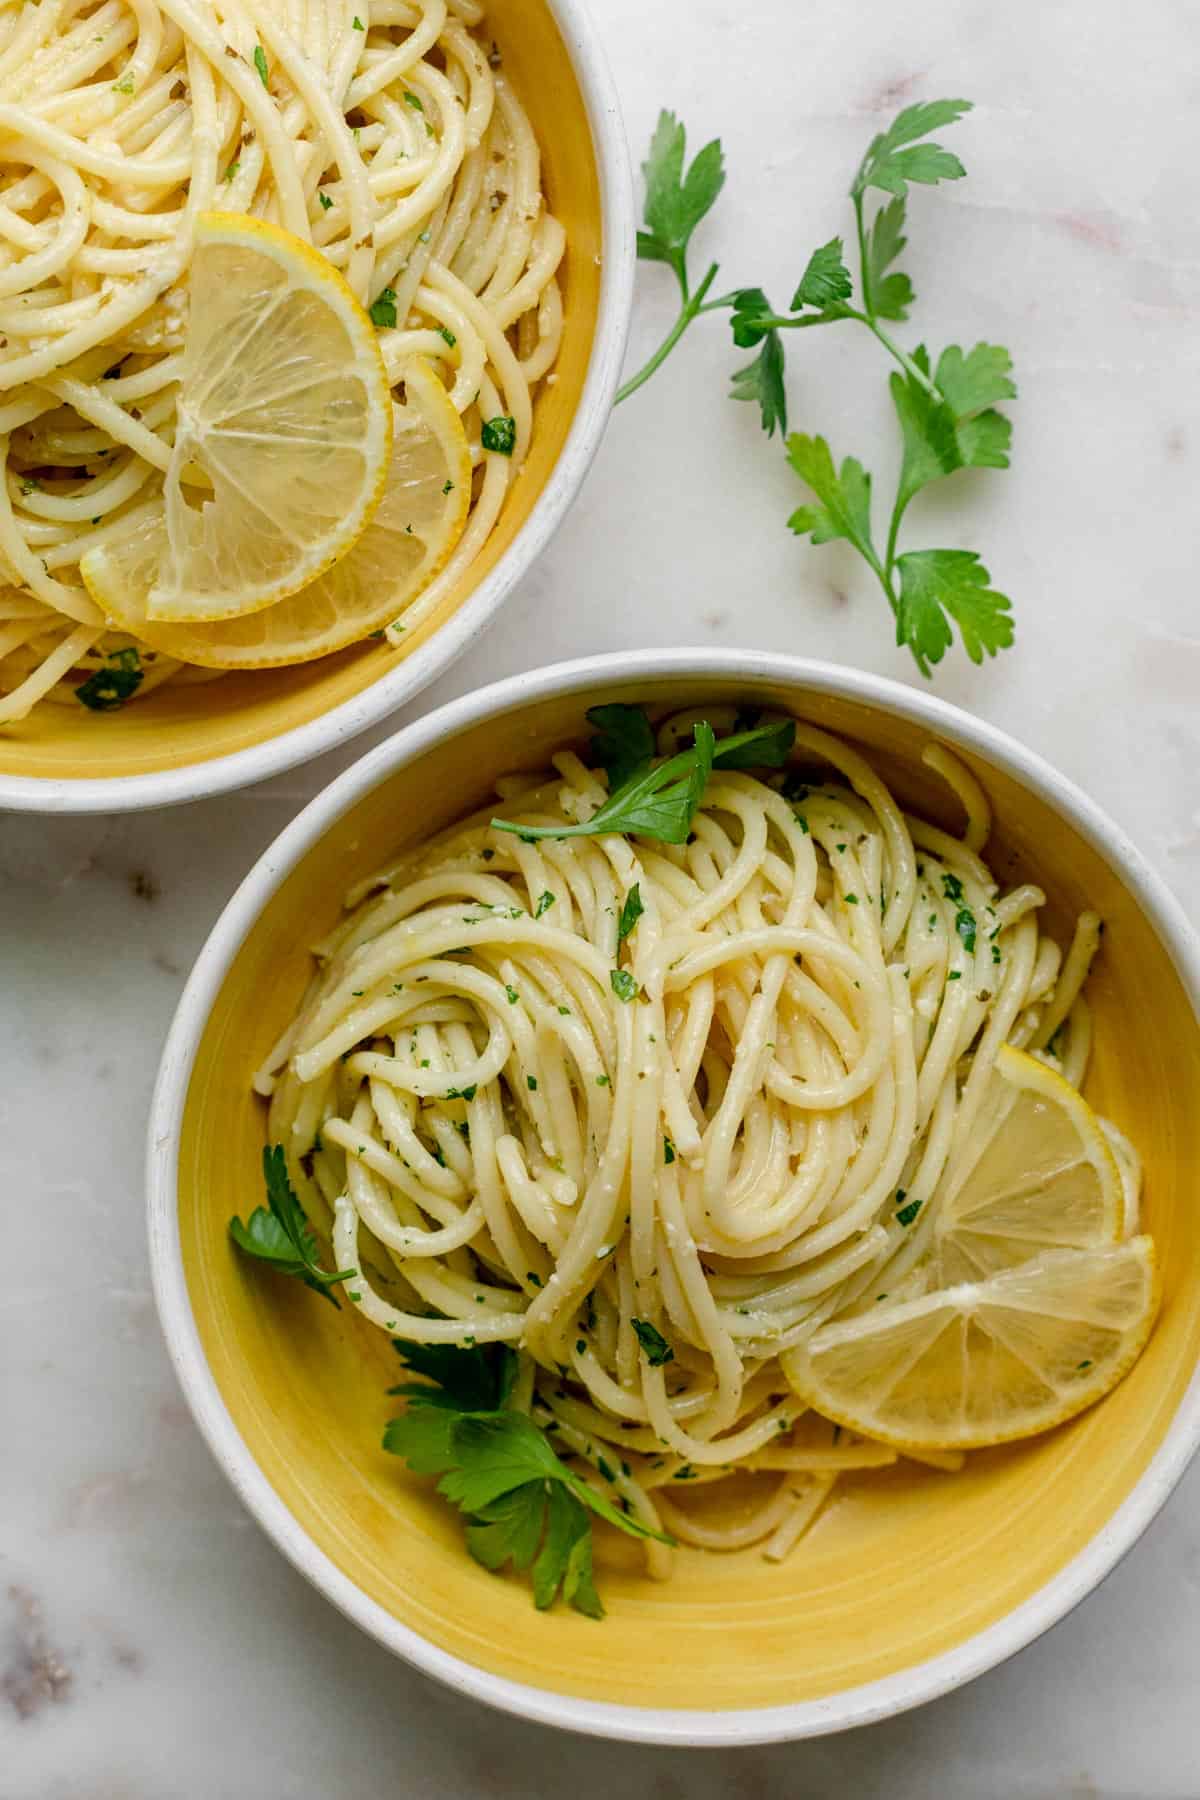 Two bowls of the lemon pasta served with fresh parsley